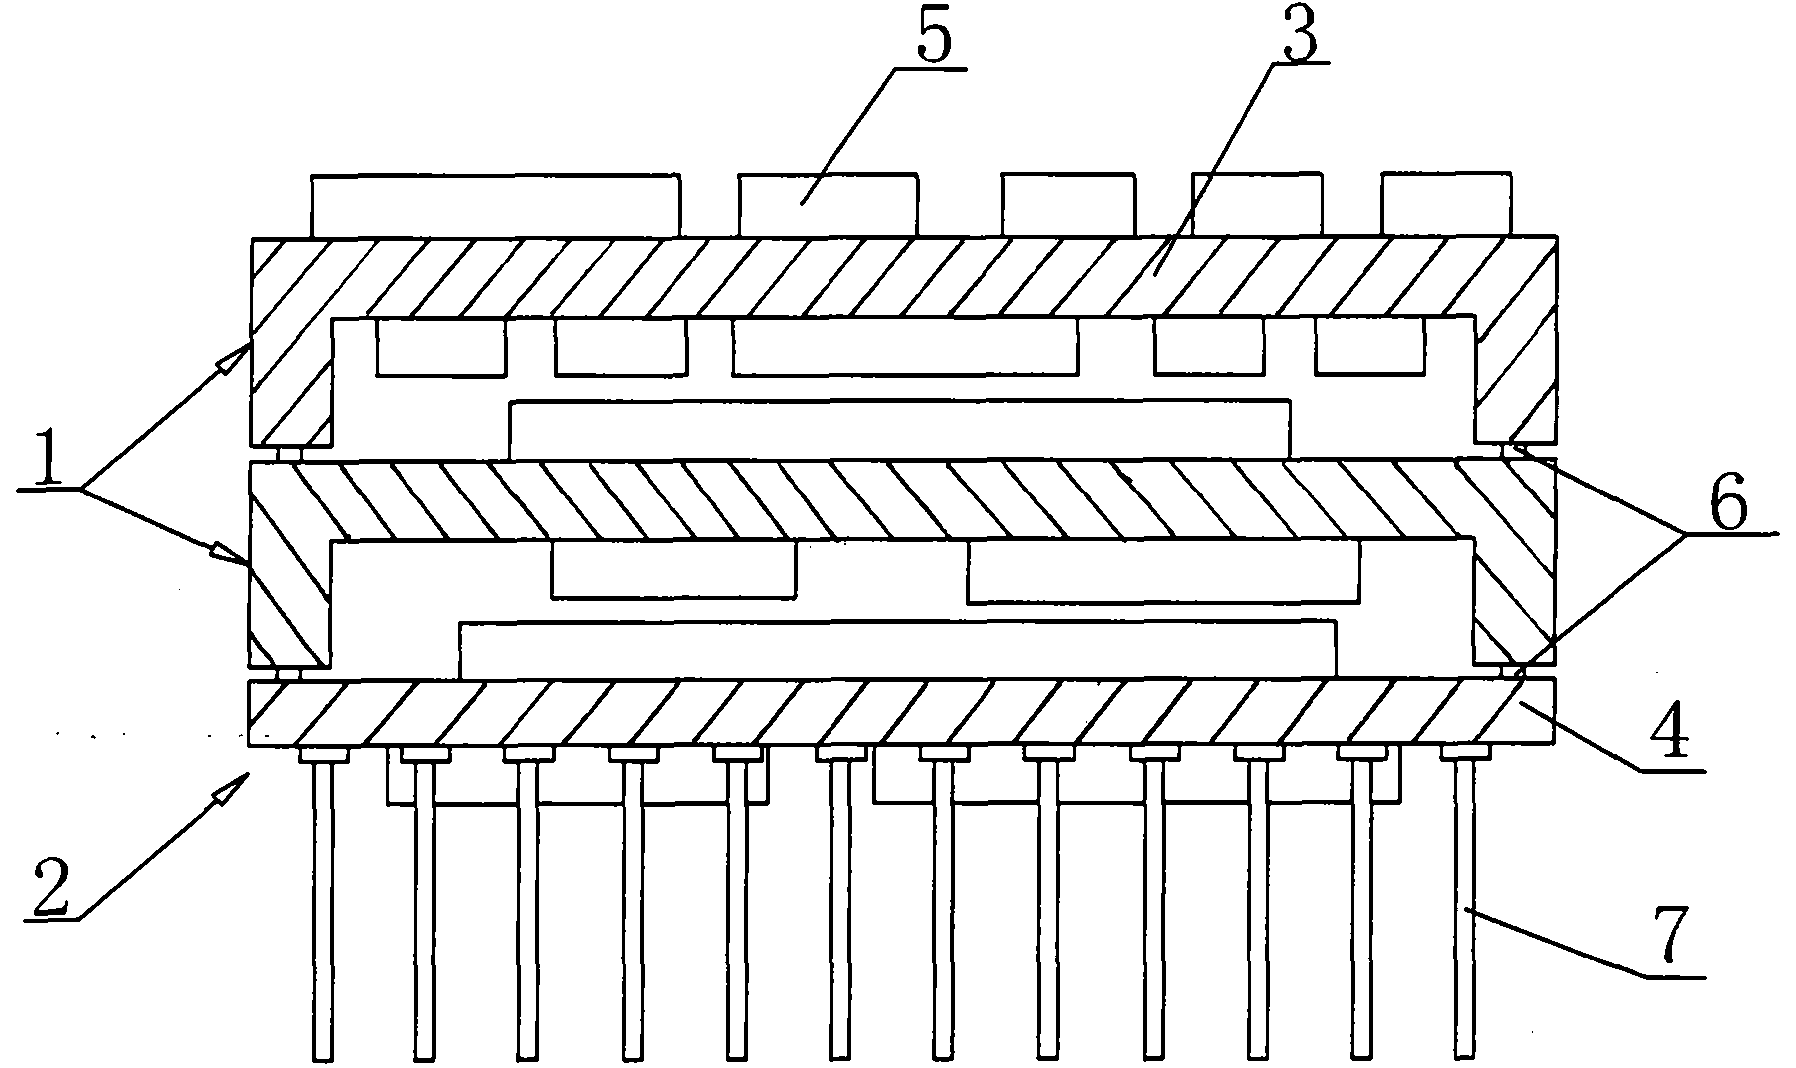 Multi-module packaged component